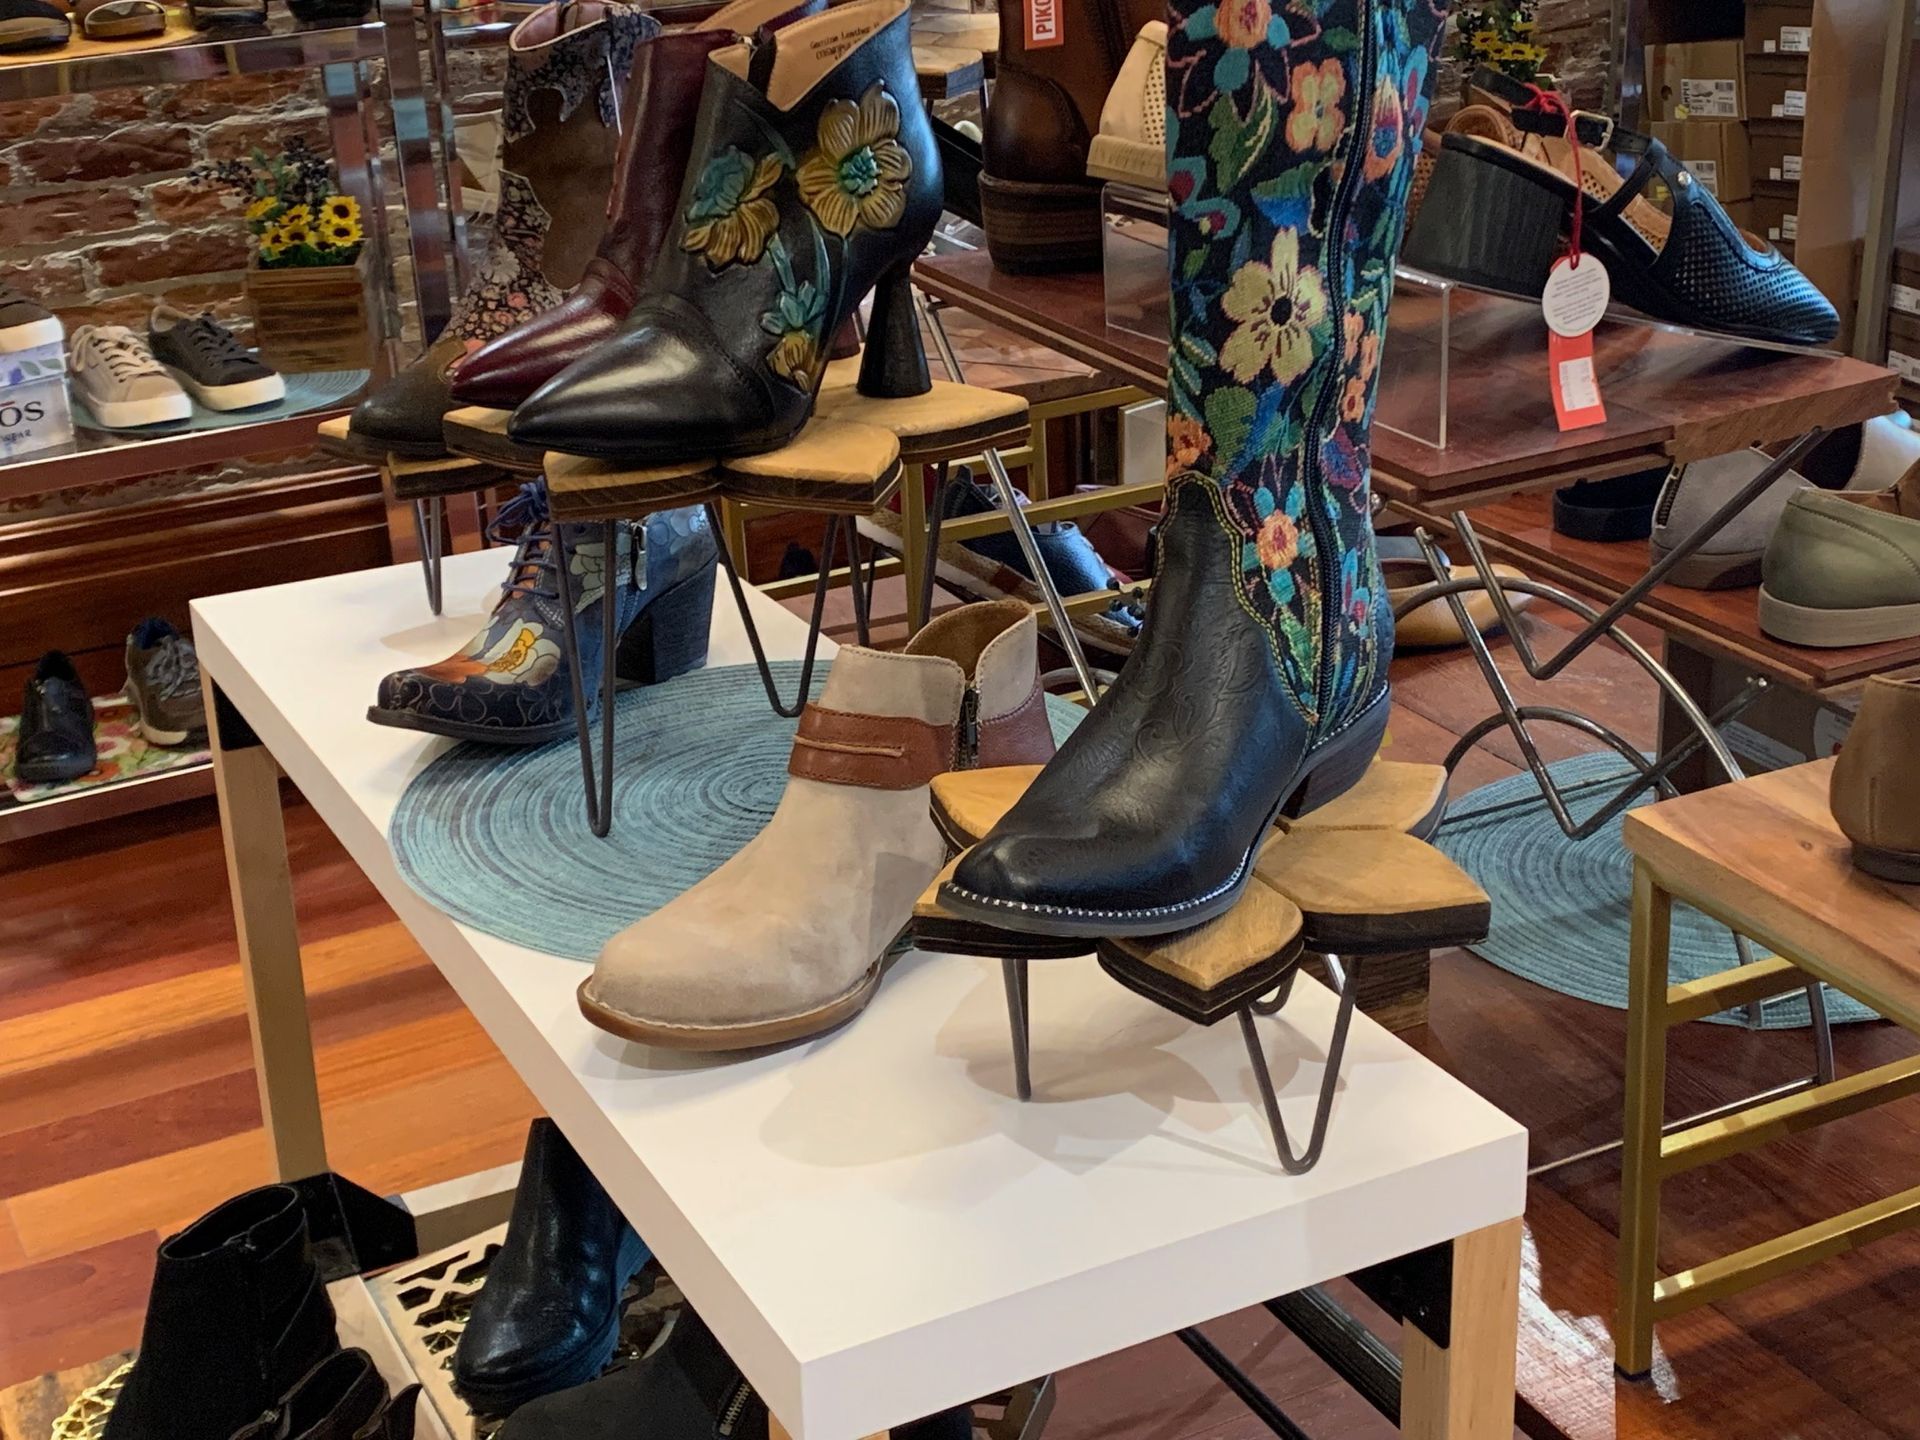 A display of cowboy boots on a table in a shoe store.